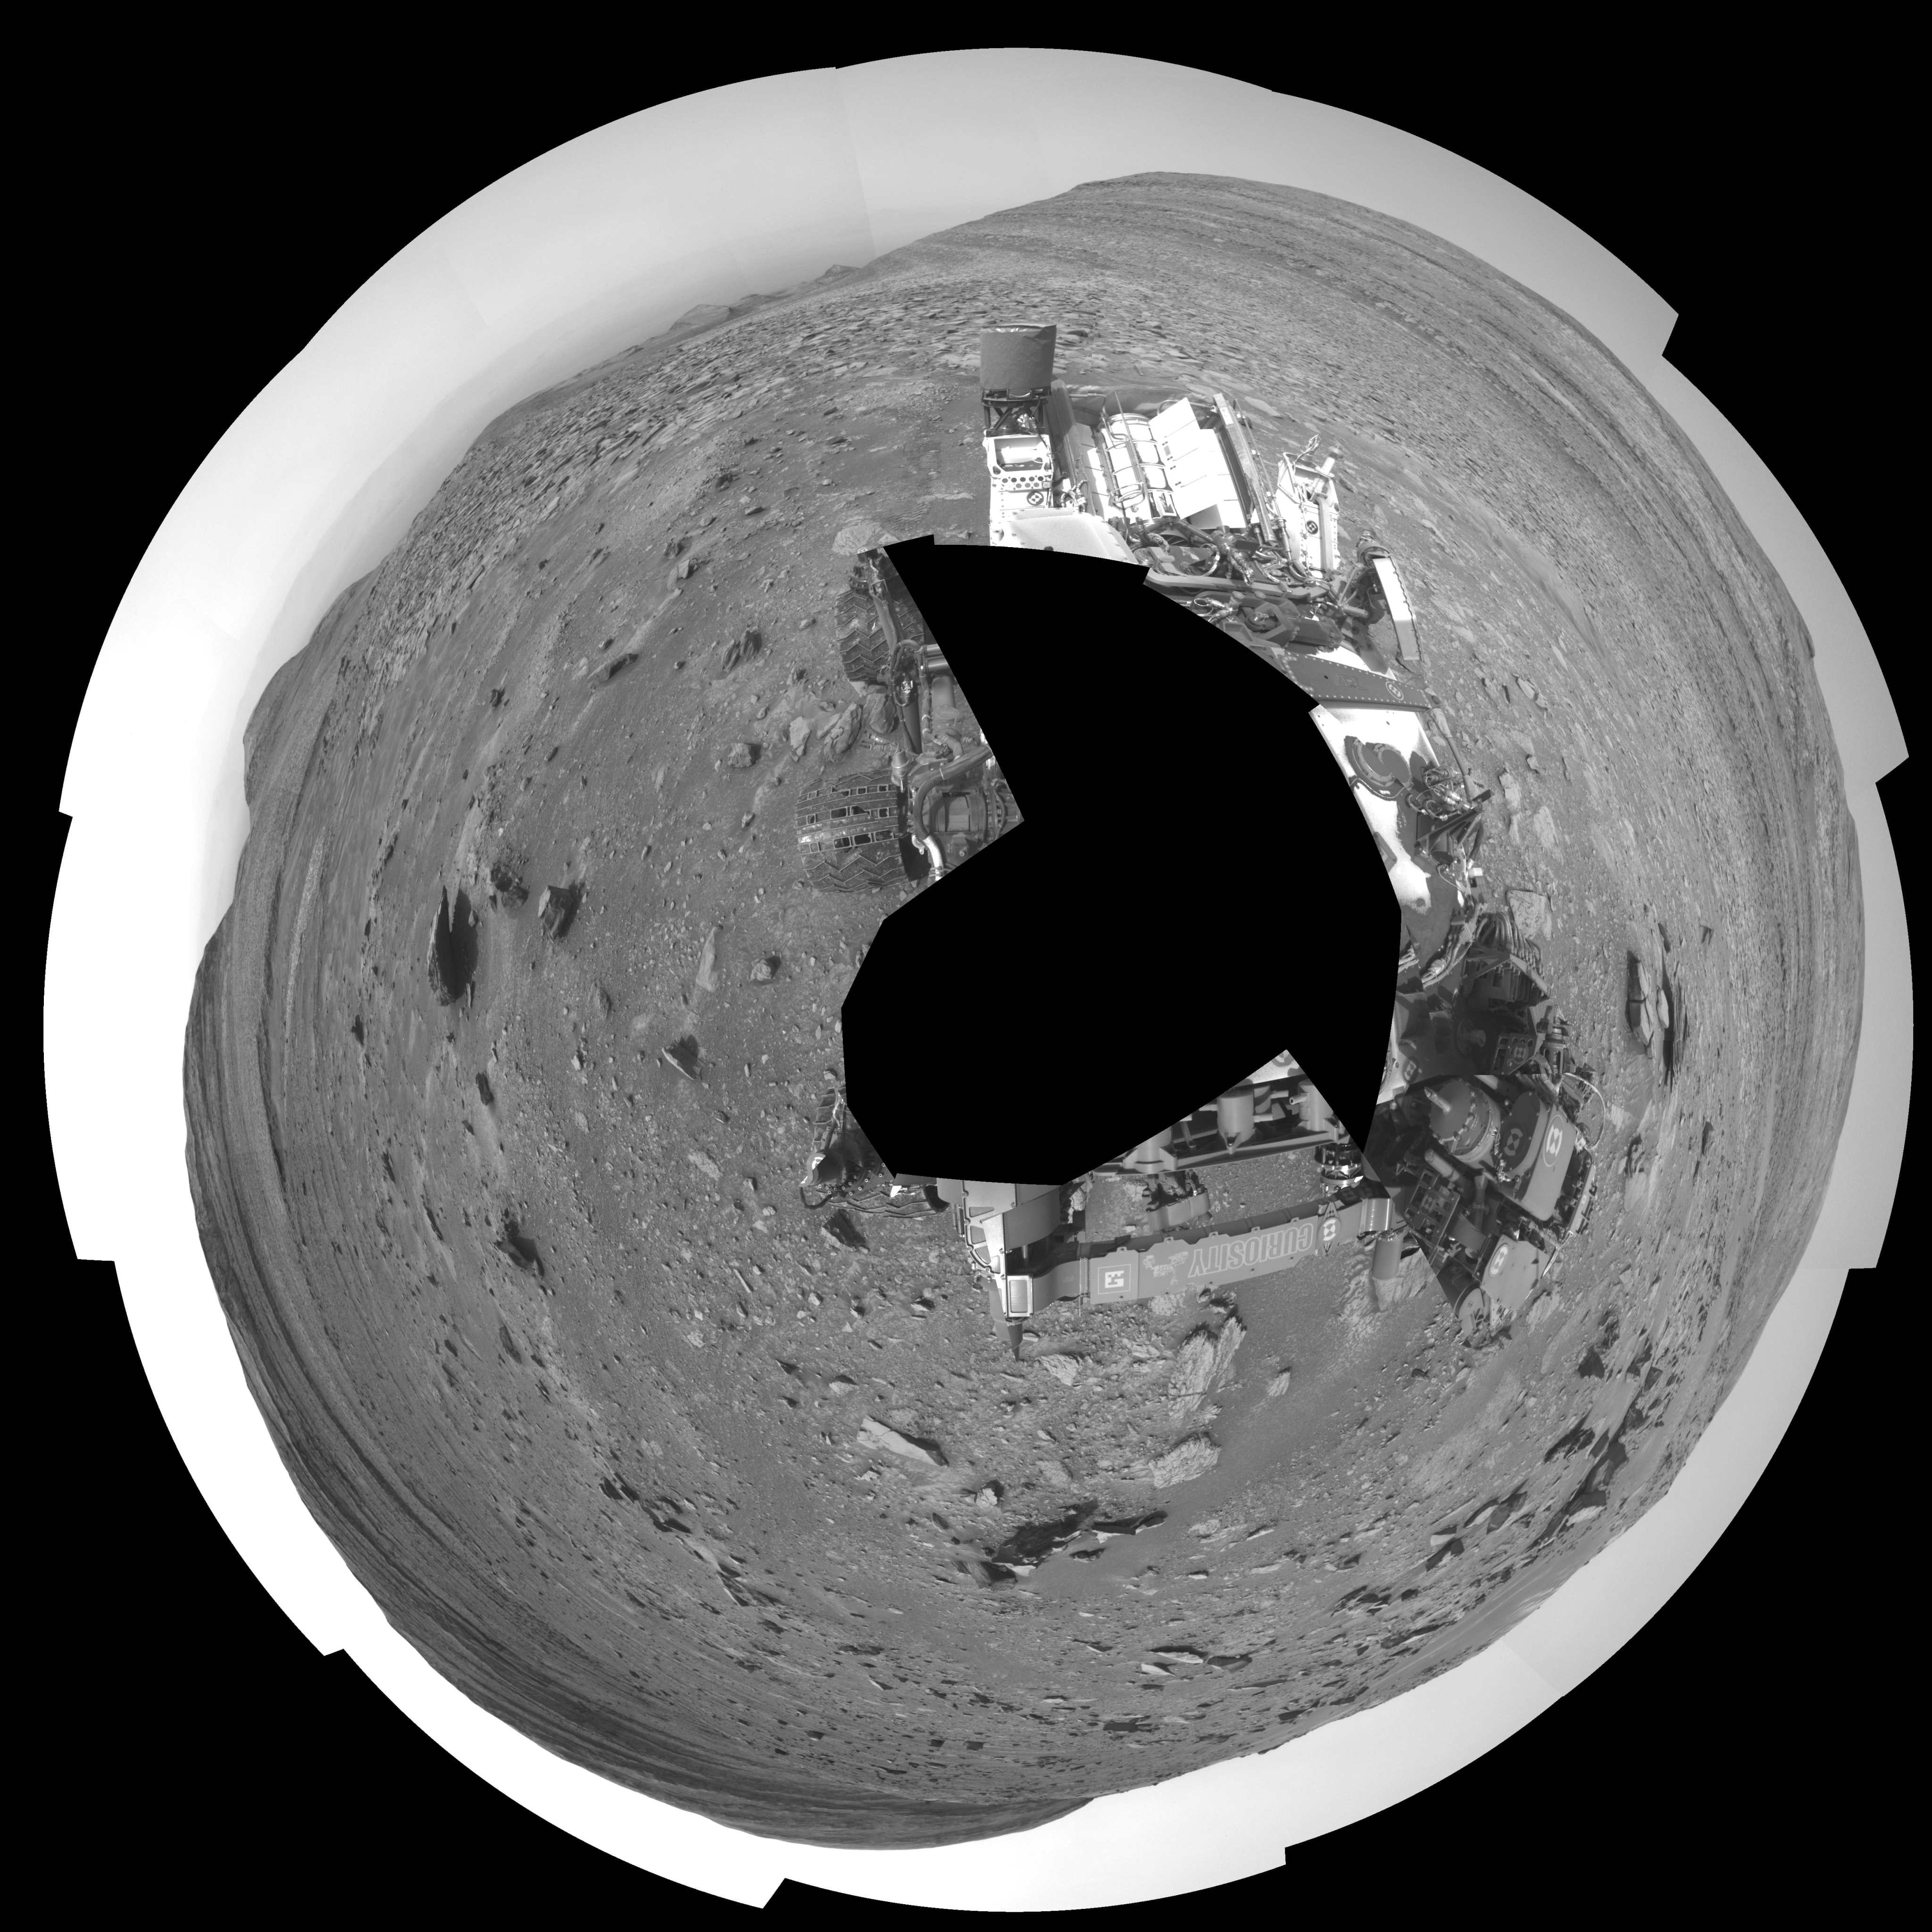 The seam-corrected mosaic provides a polar stereographic projection panorama of the Martian surface with 0 degrees azimuth (measured clockwise from north) at the top of the image.